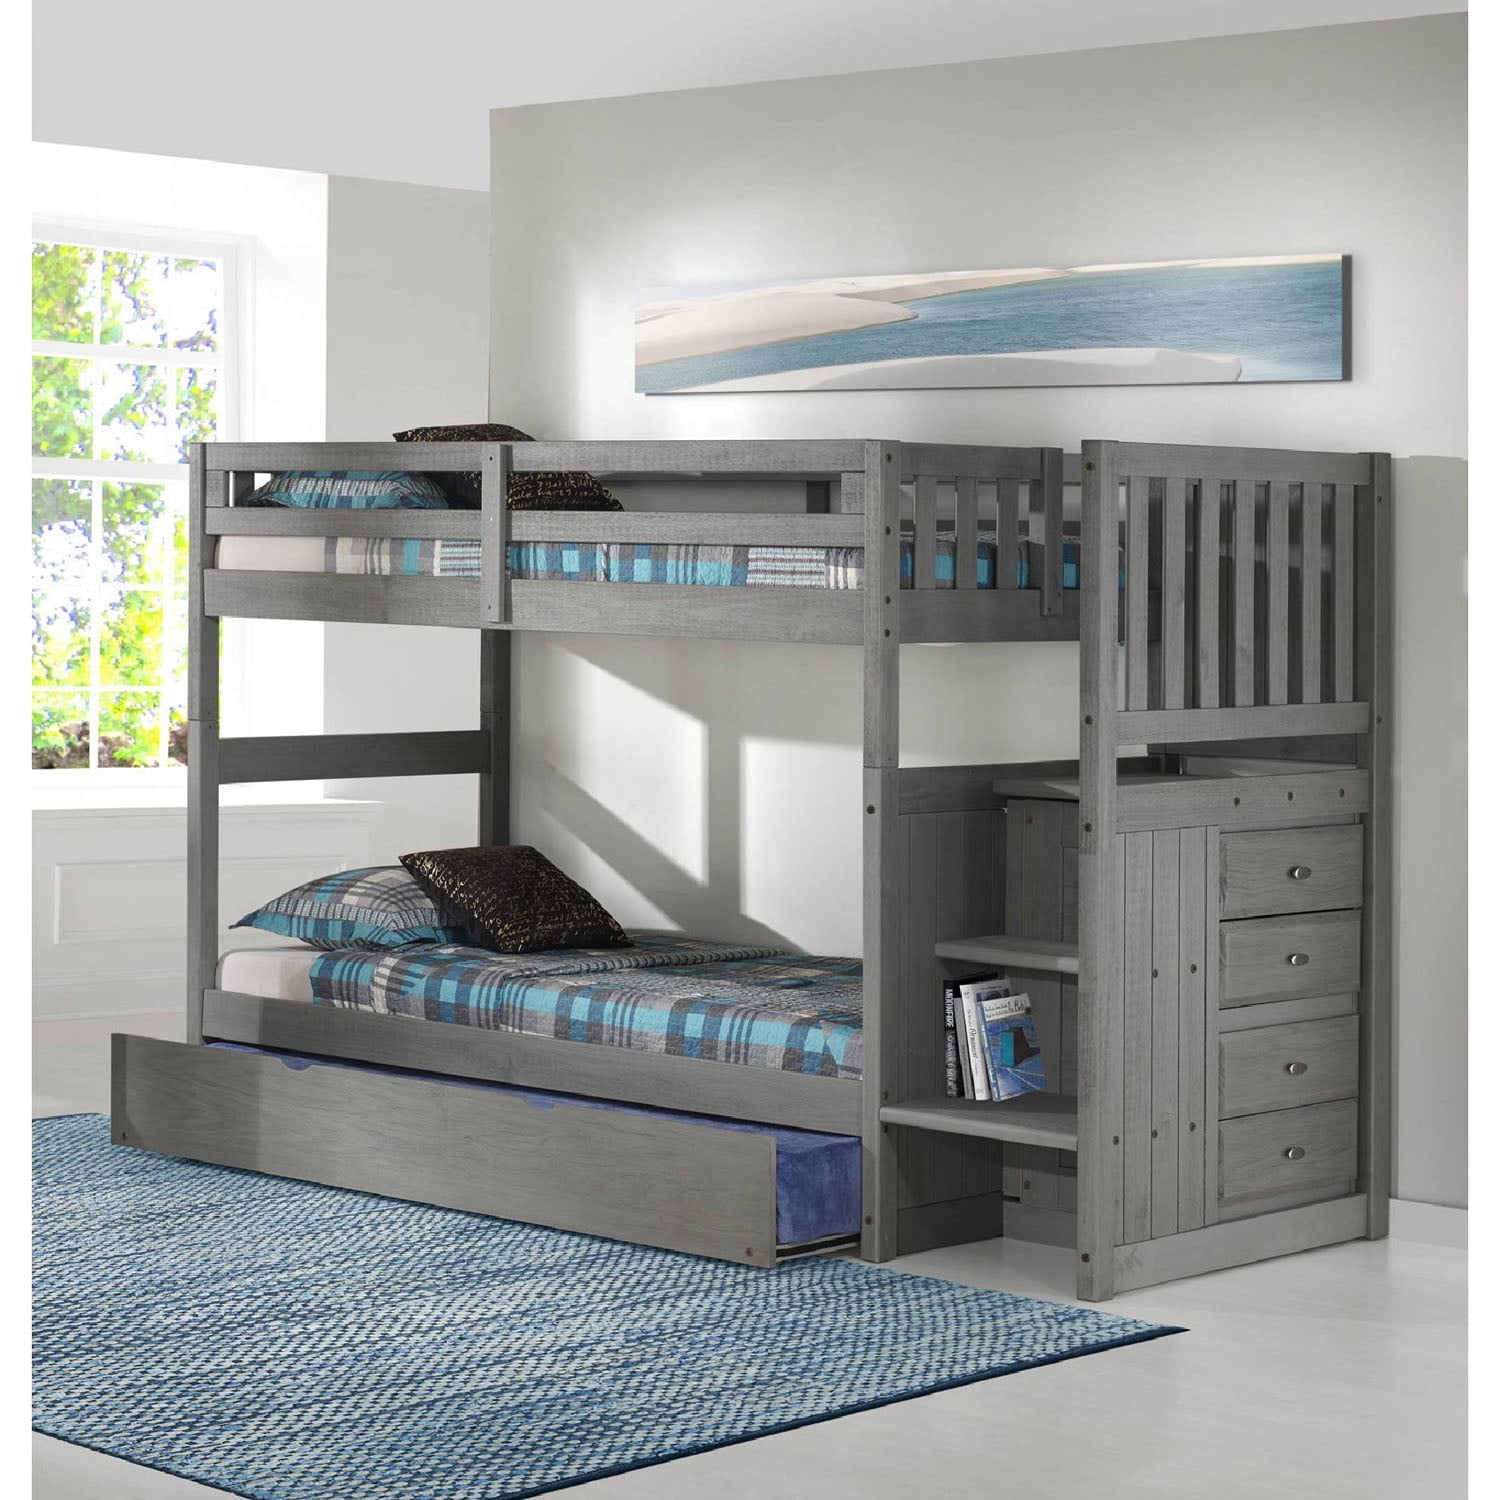 Twin Over Bunk Bed, Cambridge Staircase Bunk Bed With Trundle